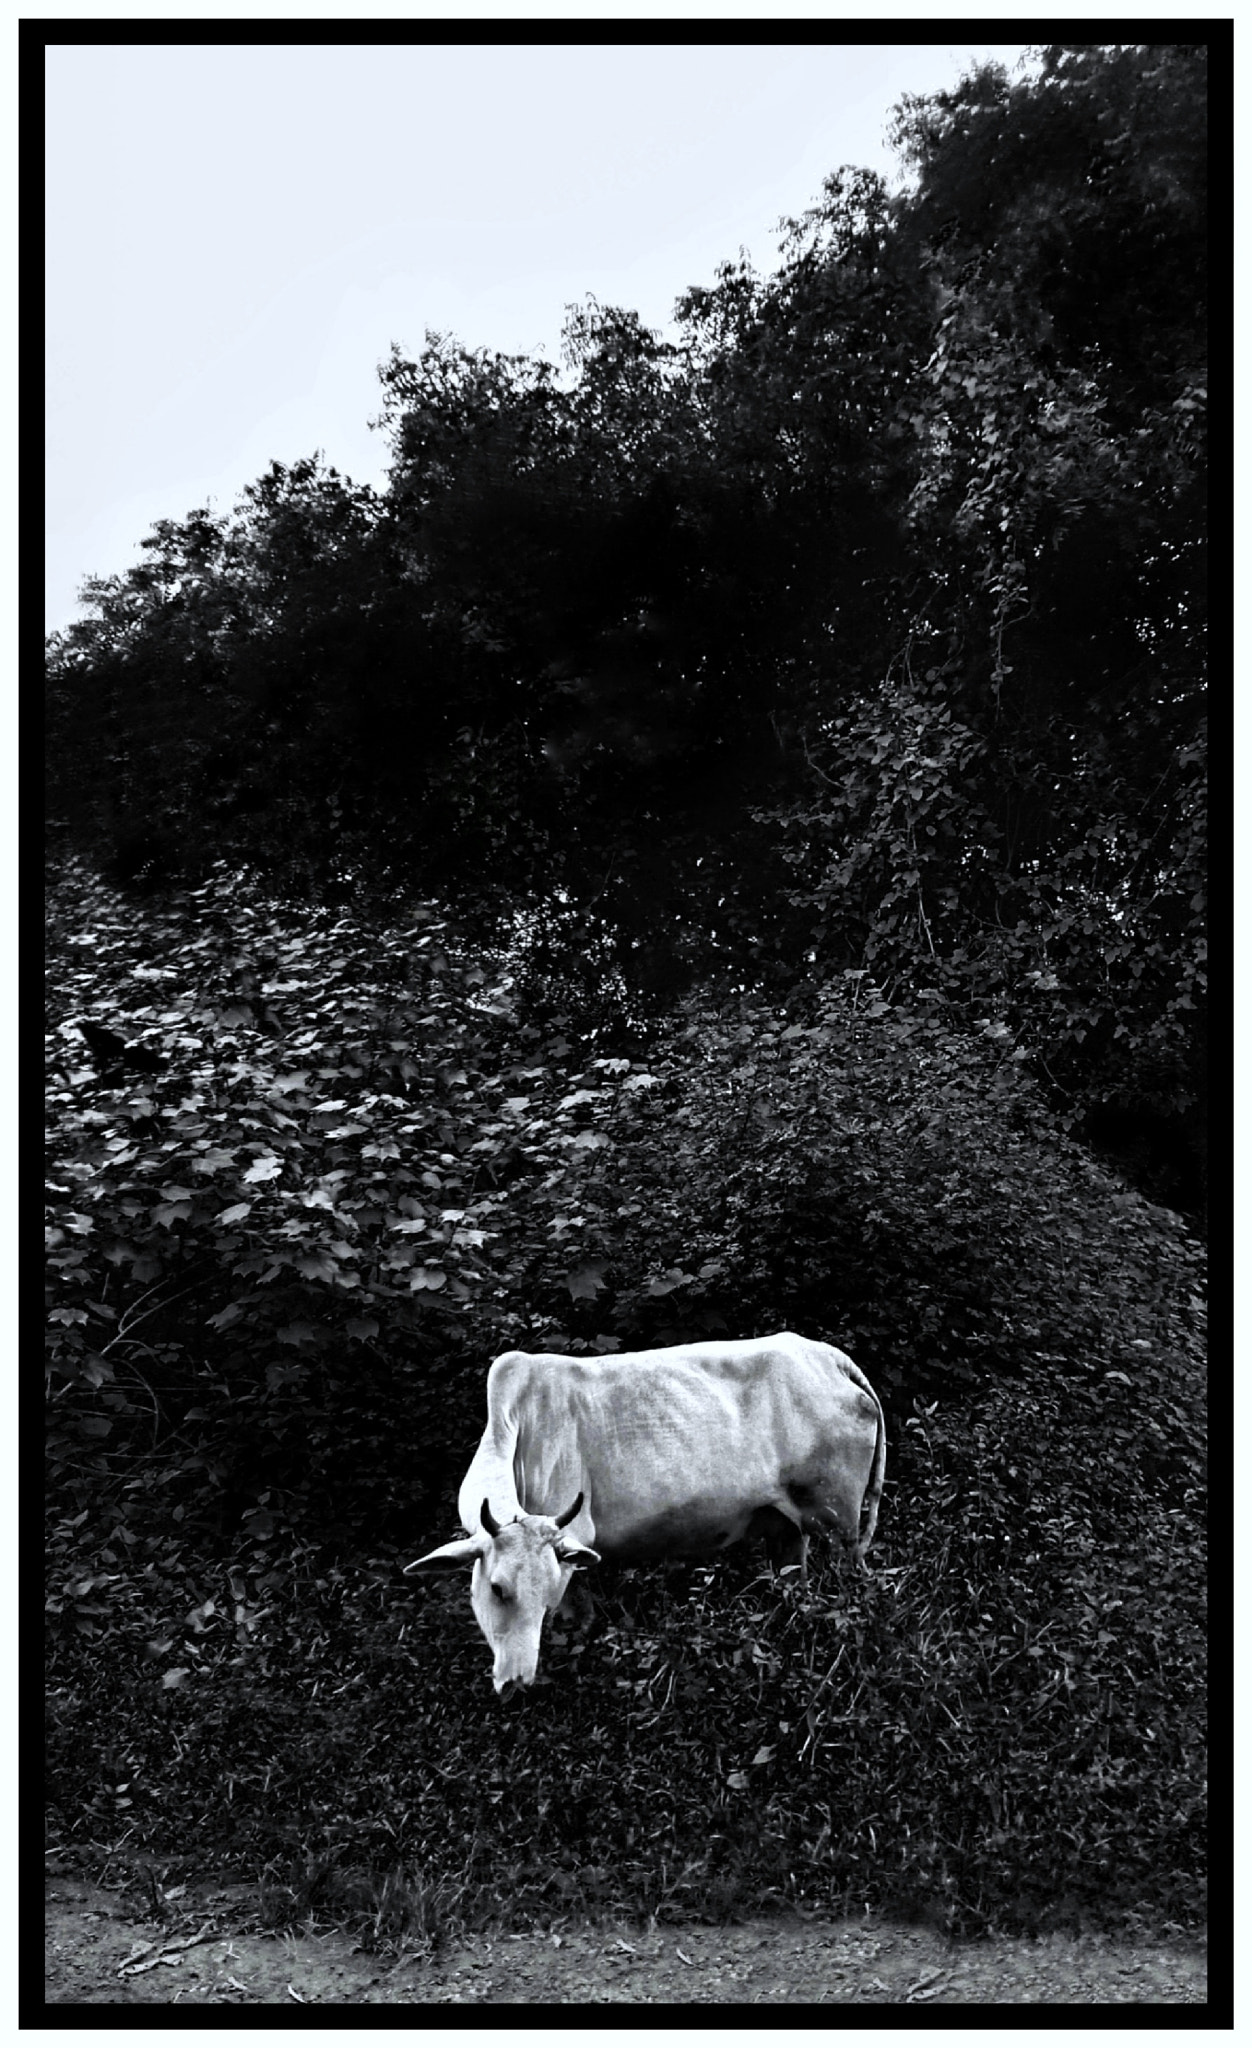 A Five-legged Cow in the hills.. Smartphone capture..  To find out more, read the Description...